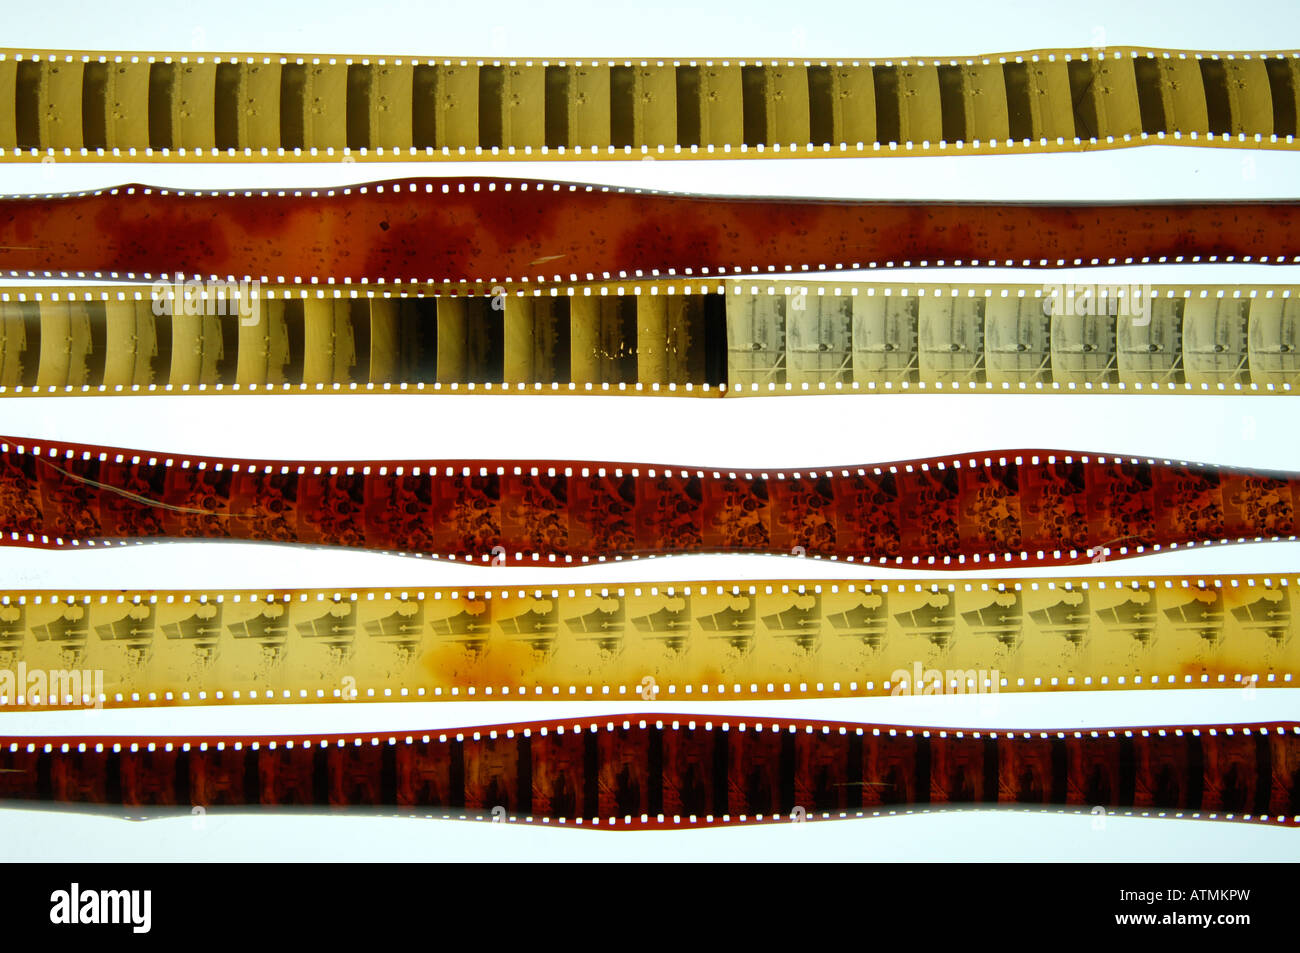 Old celluloid film Stock Photo - Alamy, celluloid photograph